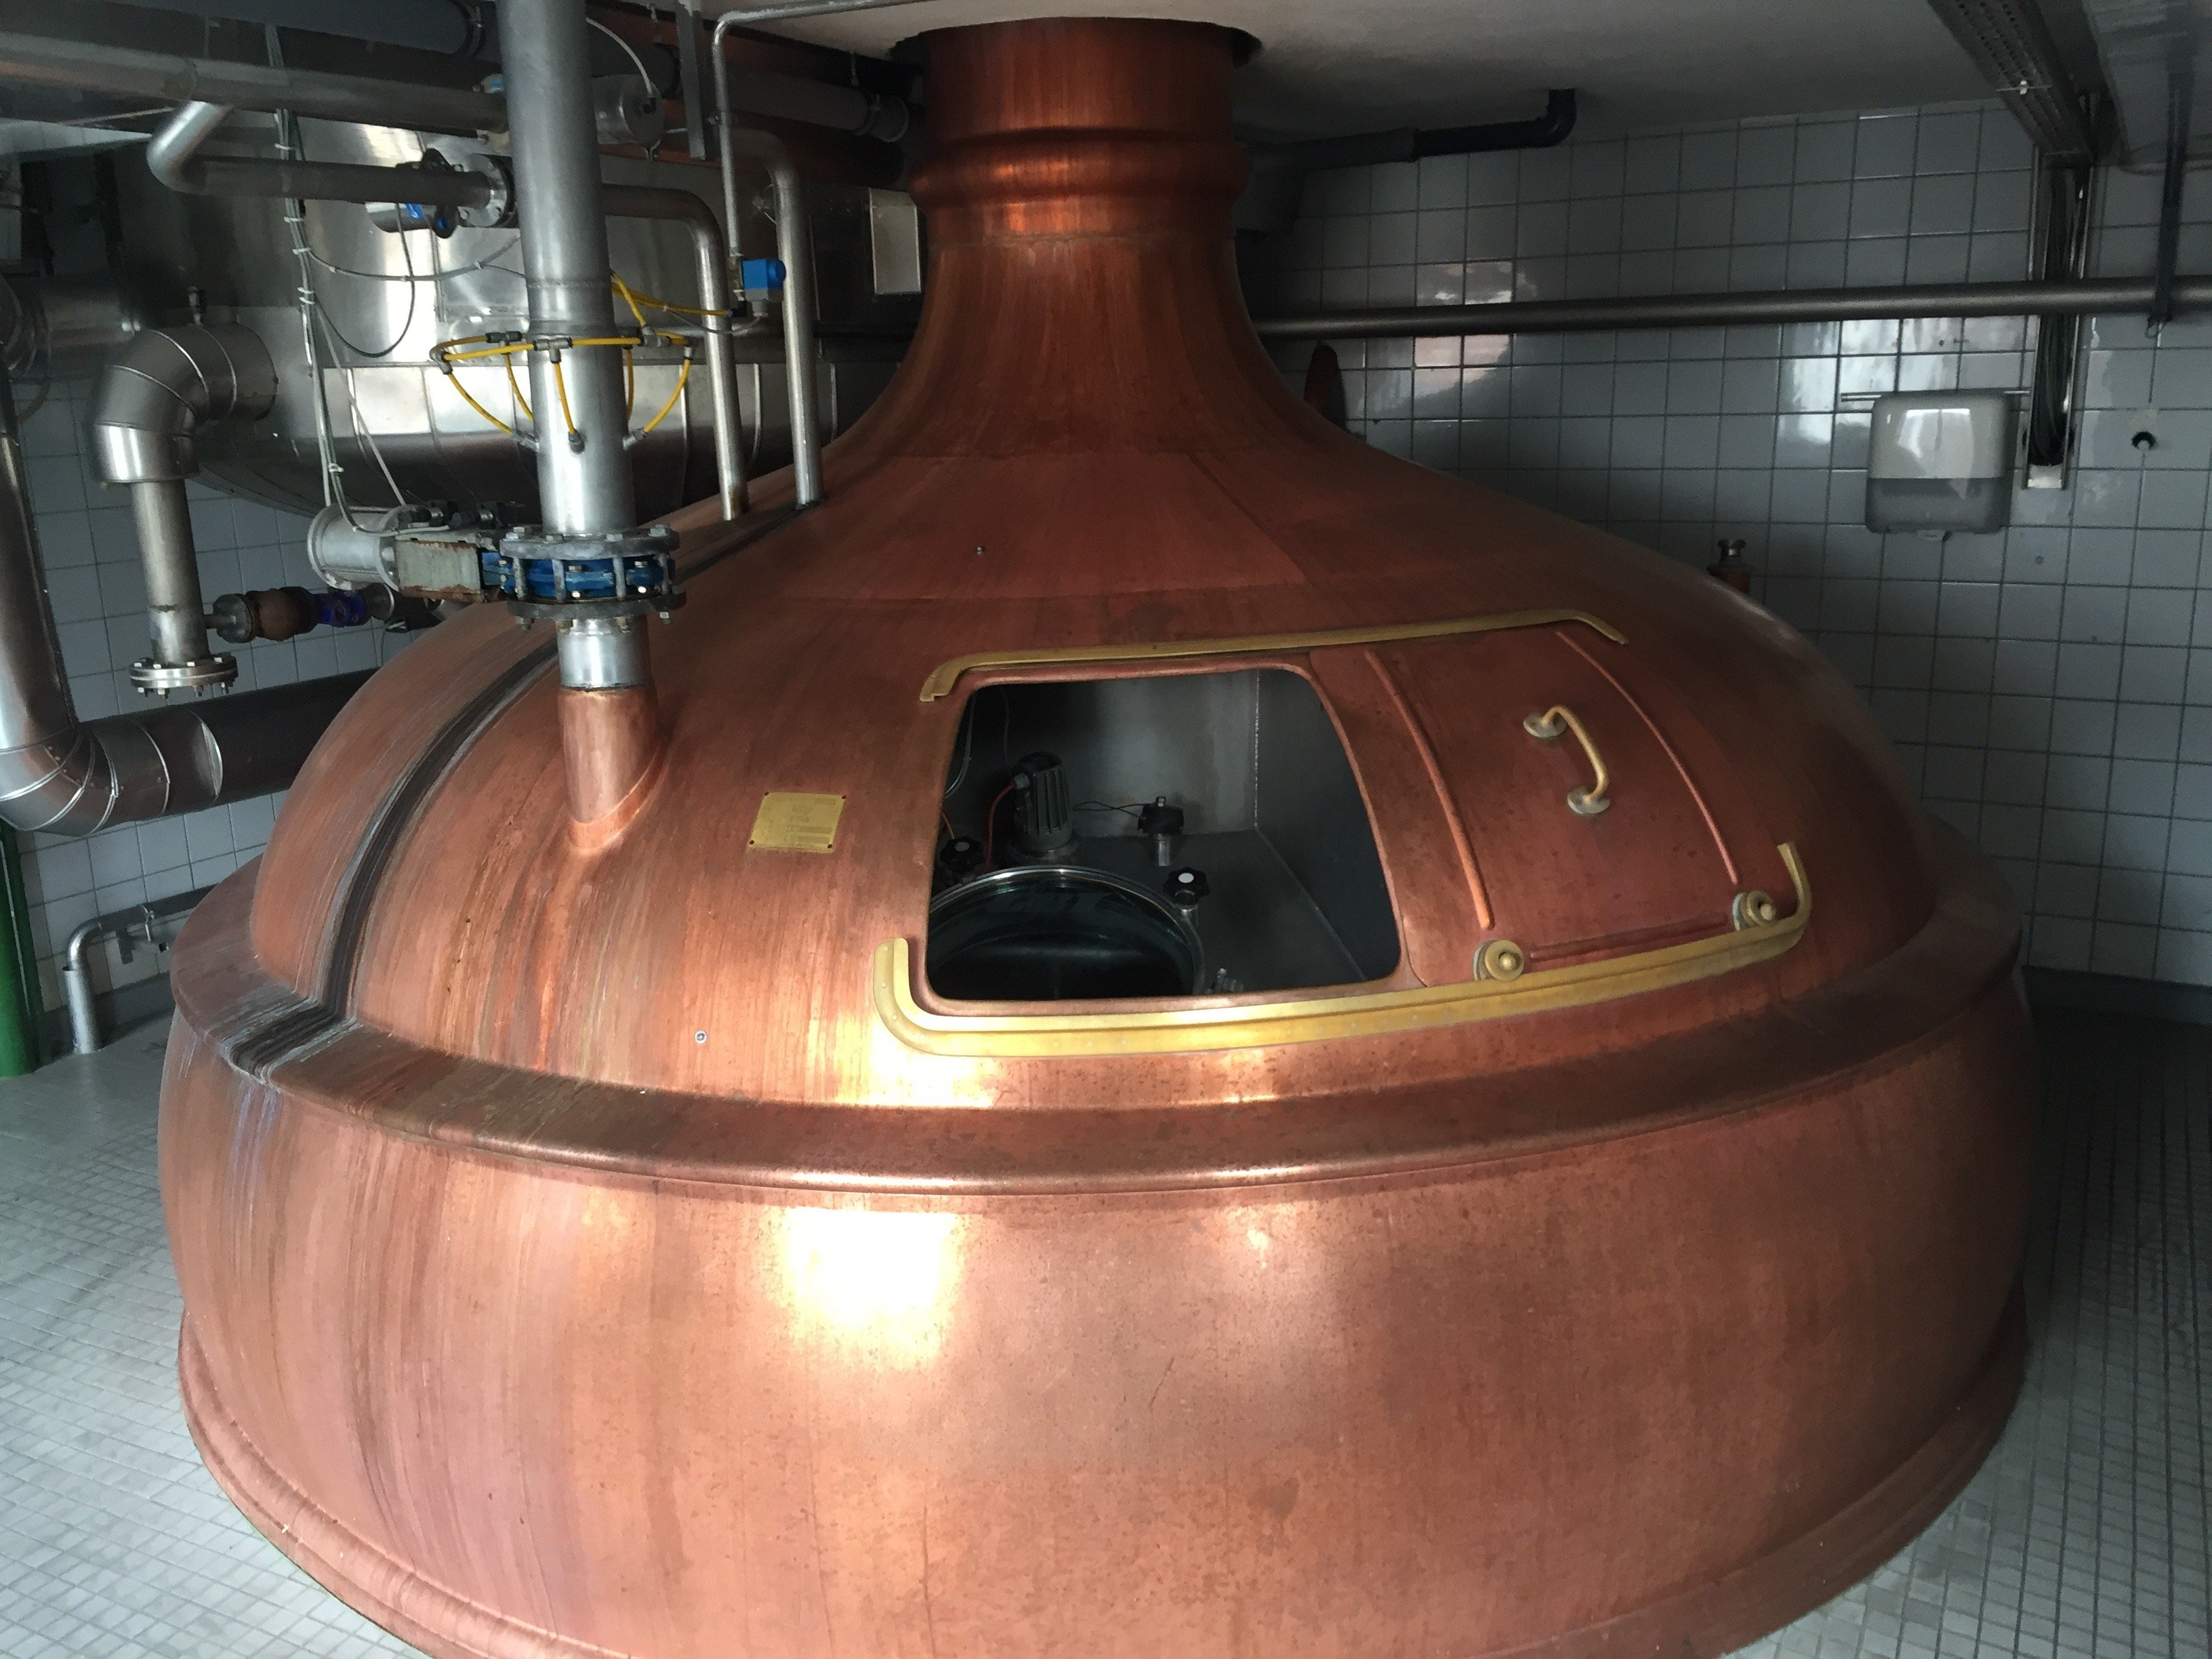 Privatbrauerei H. Egerer brewery from Germany